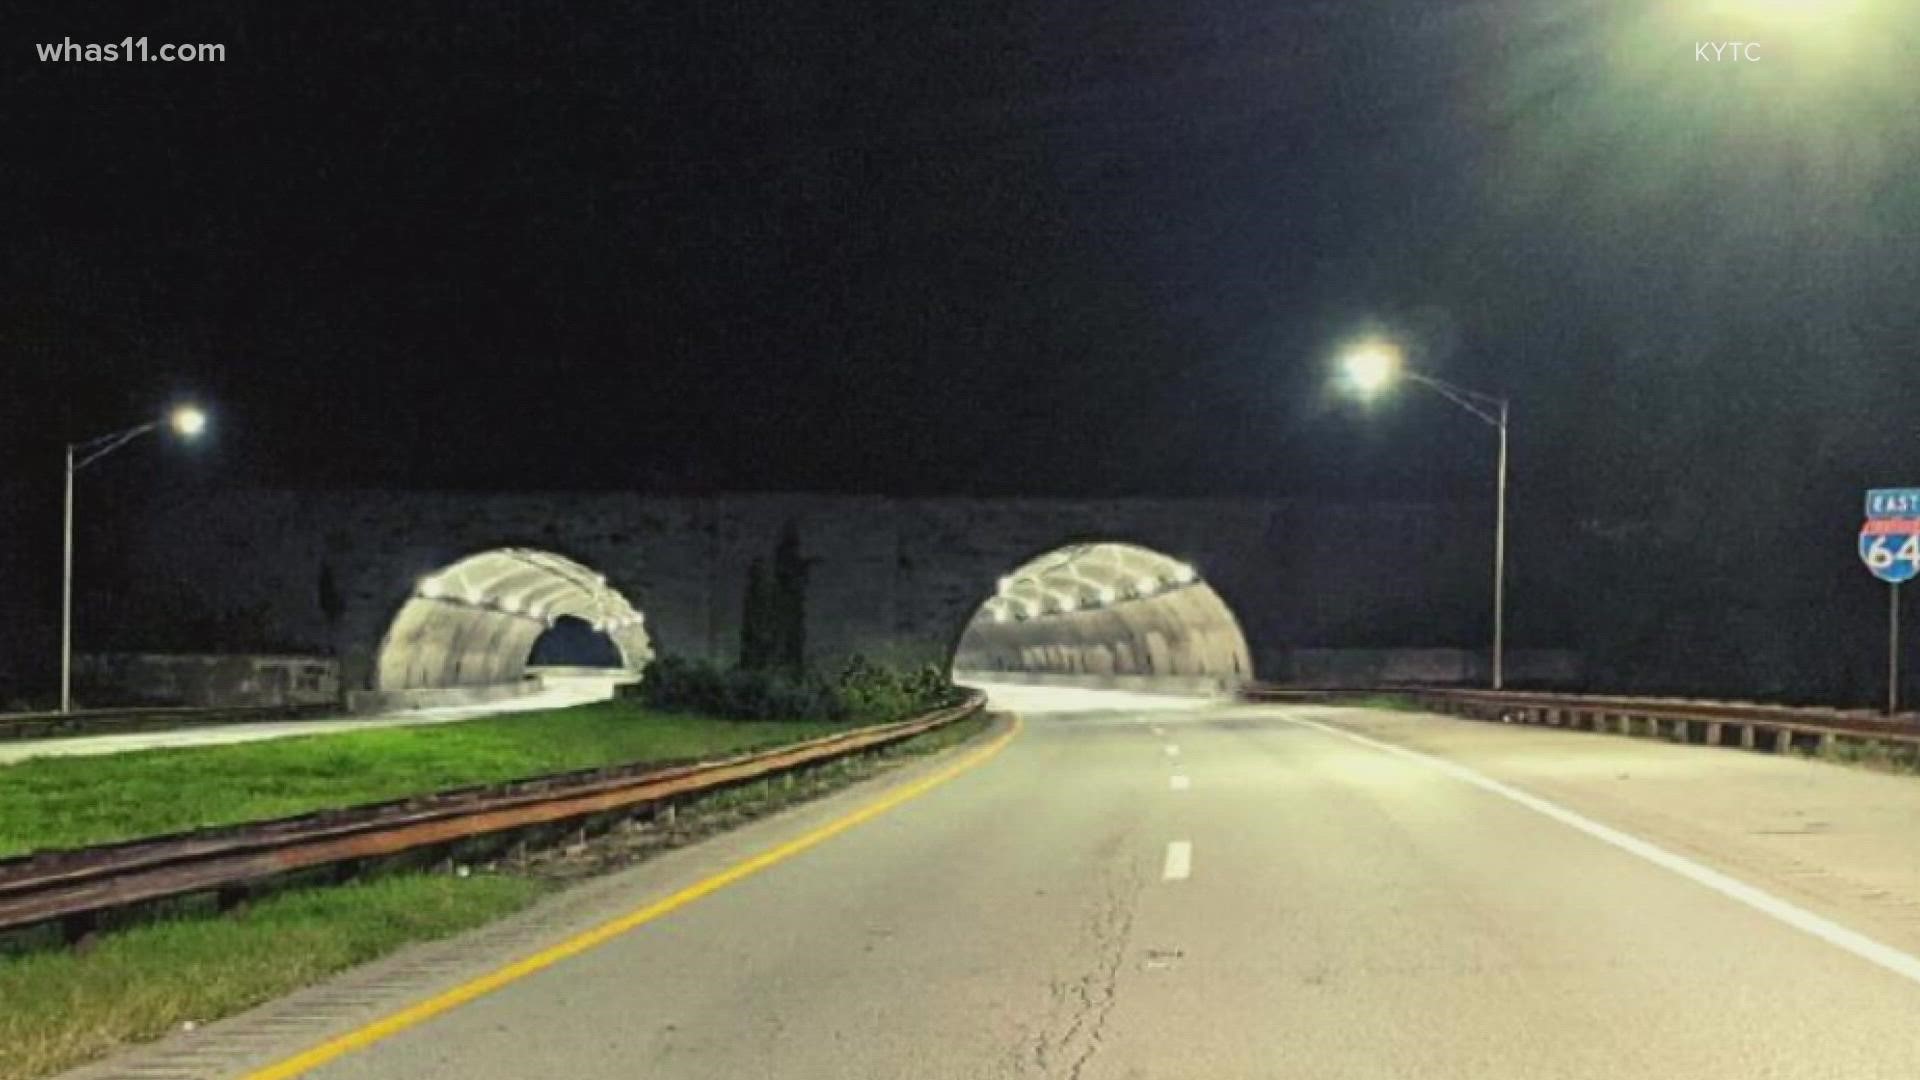 Officials with the Kentucky Transportation Cabinet said the lighting was upgraded and completed ahead of schedule, giving motorists better visibility.